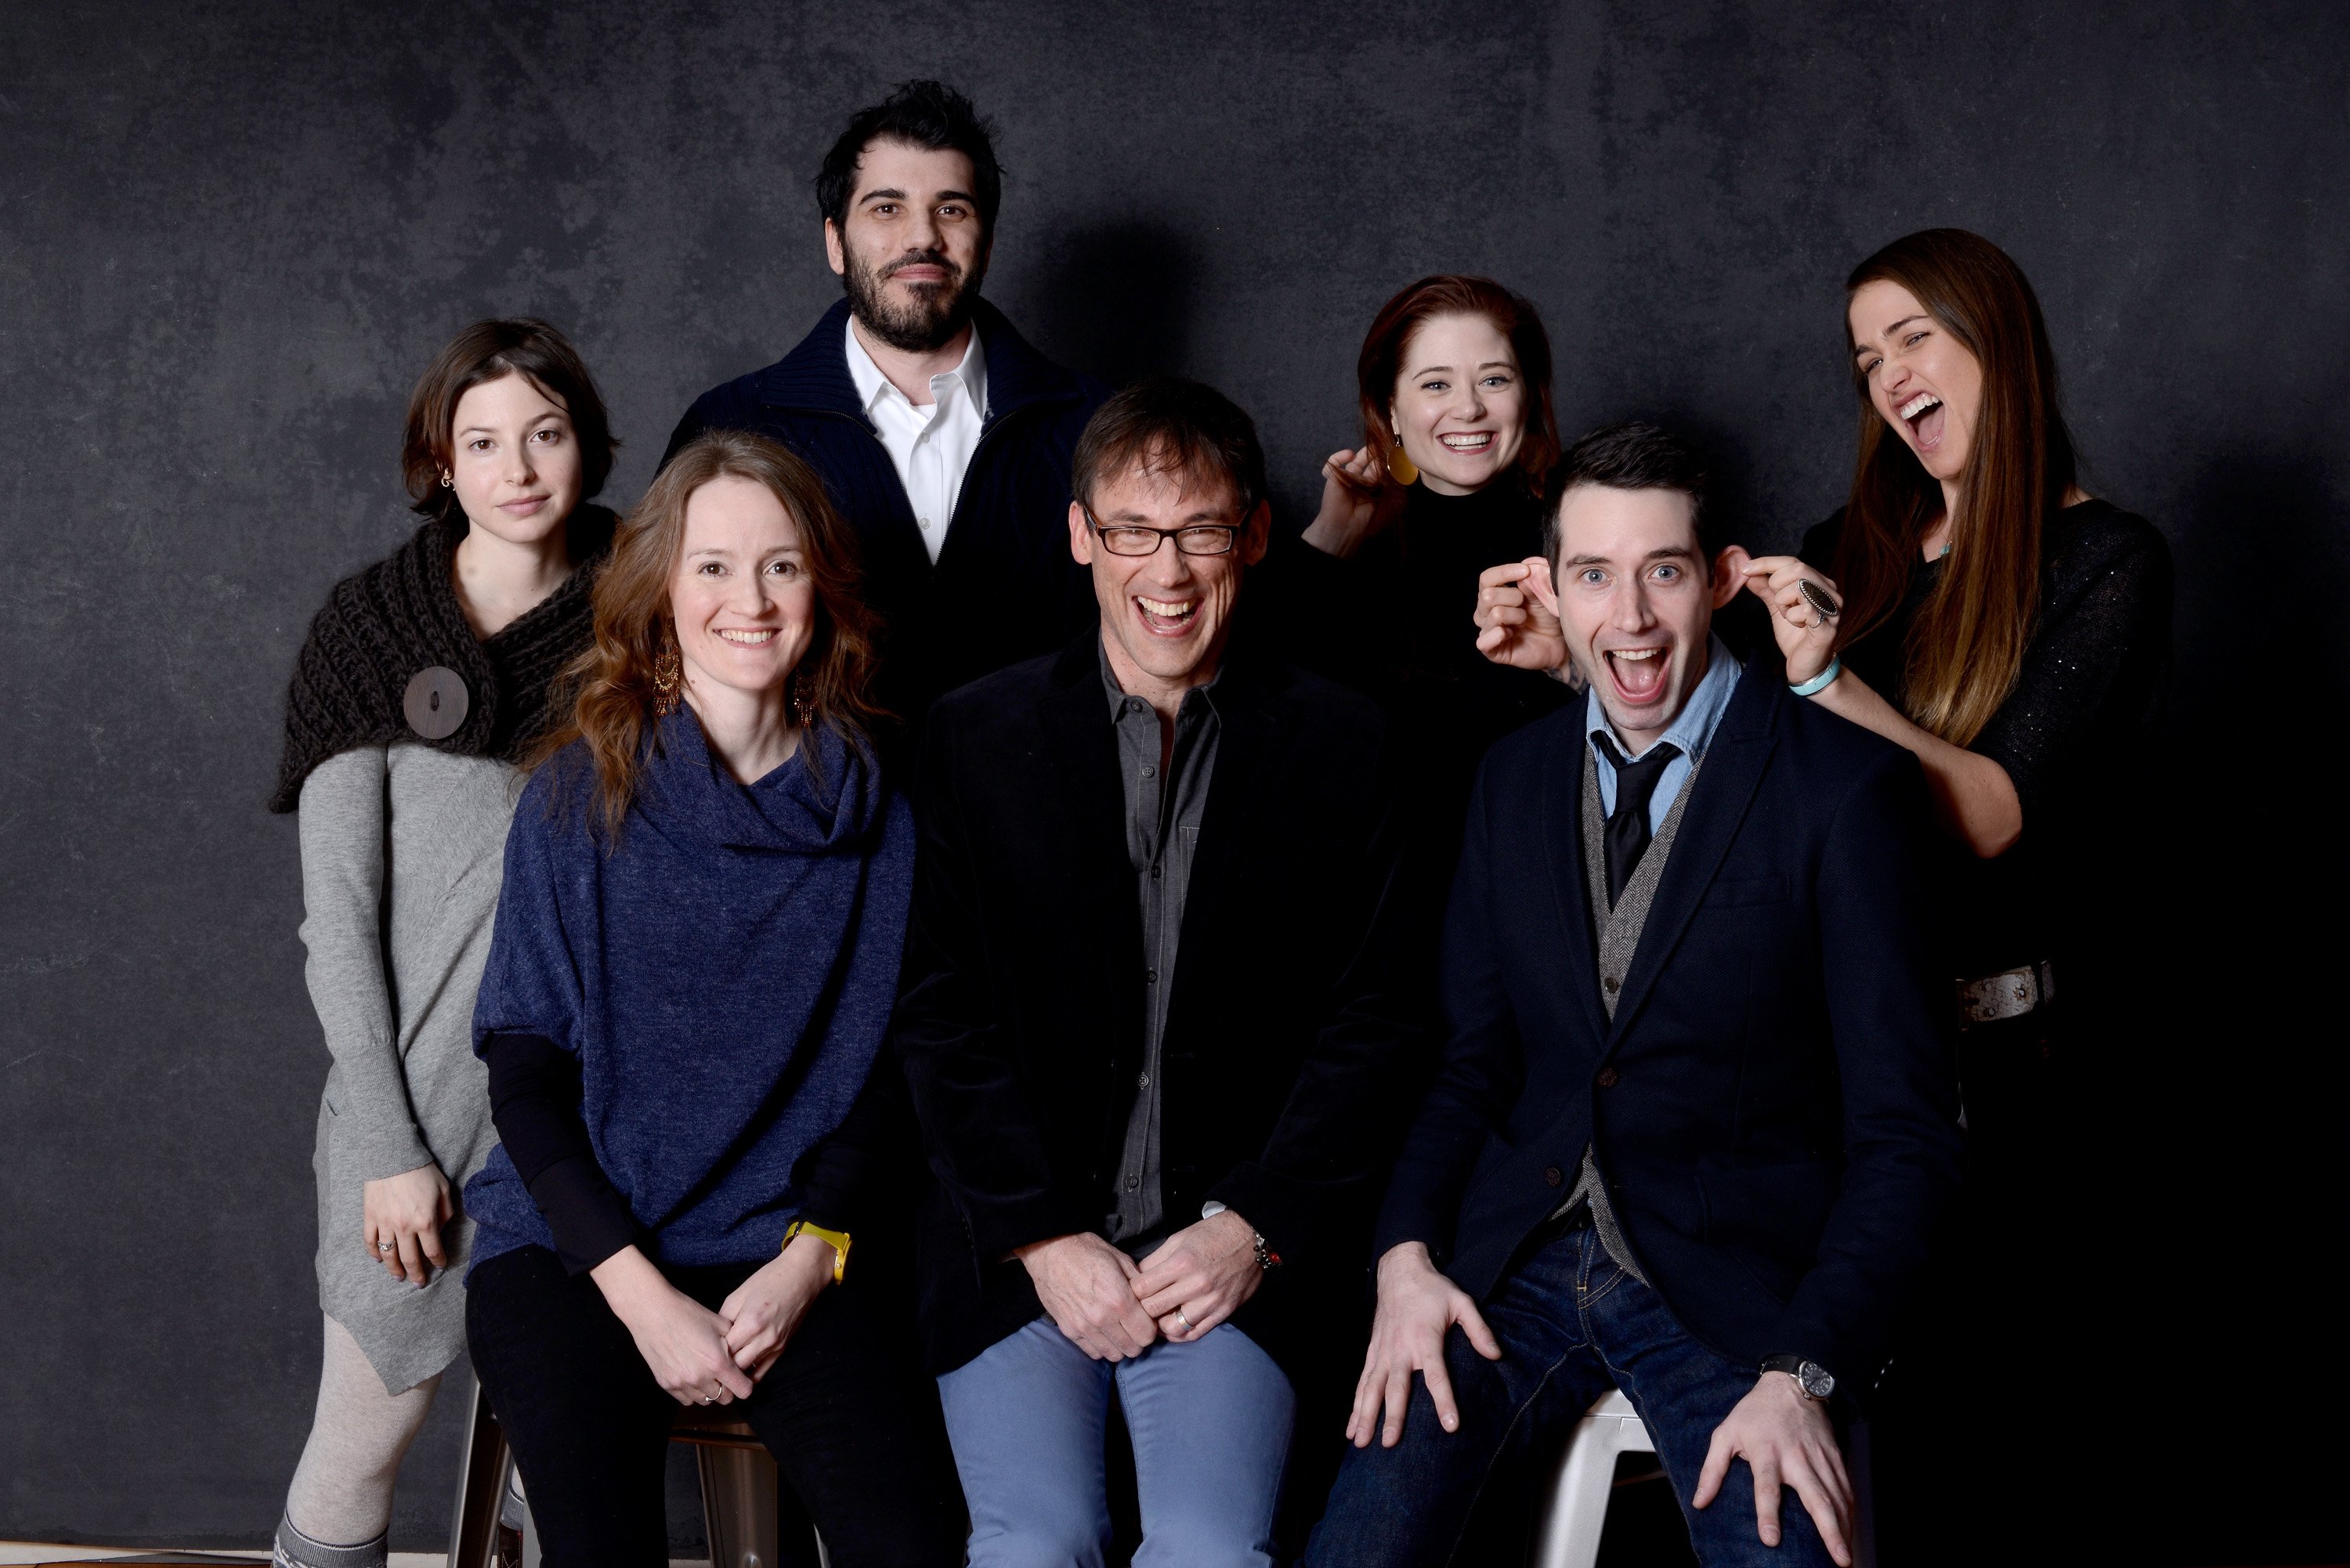 Bianca Butti and her team pose for a portrait during the 2013 Sundance Film Festiva In Park City | Source: Getty Images